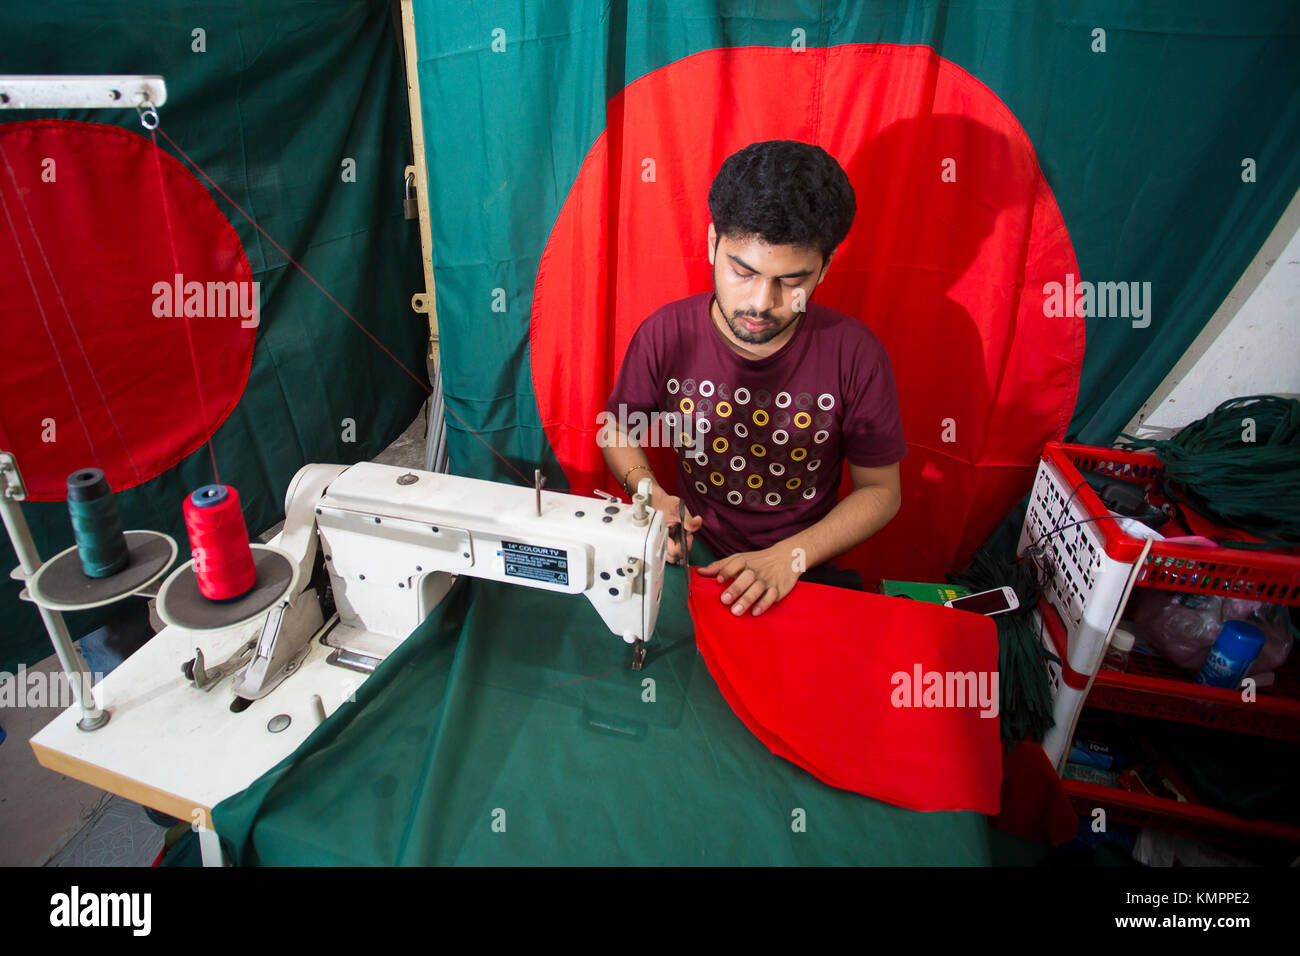 Dhaka, Bangladesh. 09th Dec, 2017. Victory day is a national holiday in Bangladesh celebrated on December 16 to commemorate the victory of the Allied forces High Command over the Pakistani forces in the Bangladesh Liberation War in 1971. A young tailor sewing cloth and making Bangladeshi national flags for selling Upcoming 16 December events. Credit: Jahangir Alam Onuchcha/Alamy Live News Stock Photo